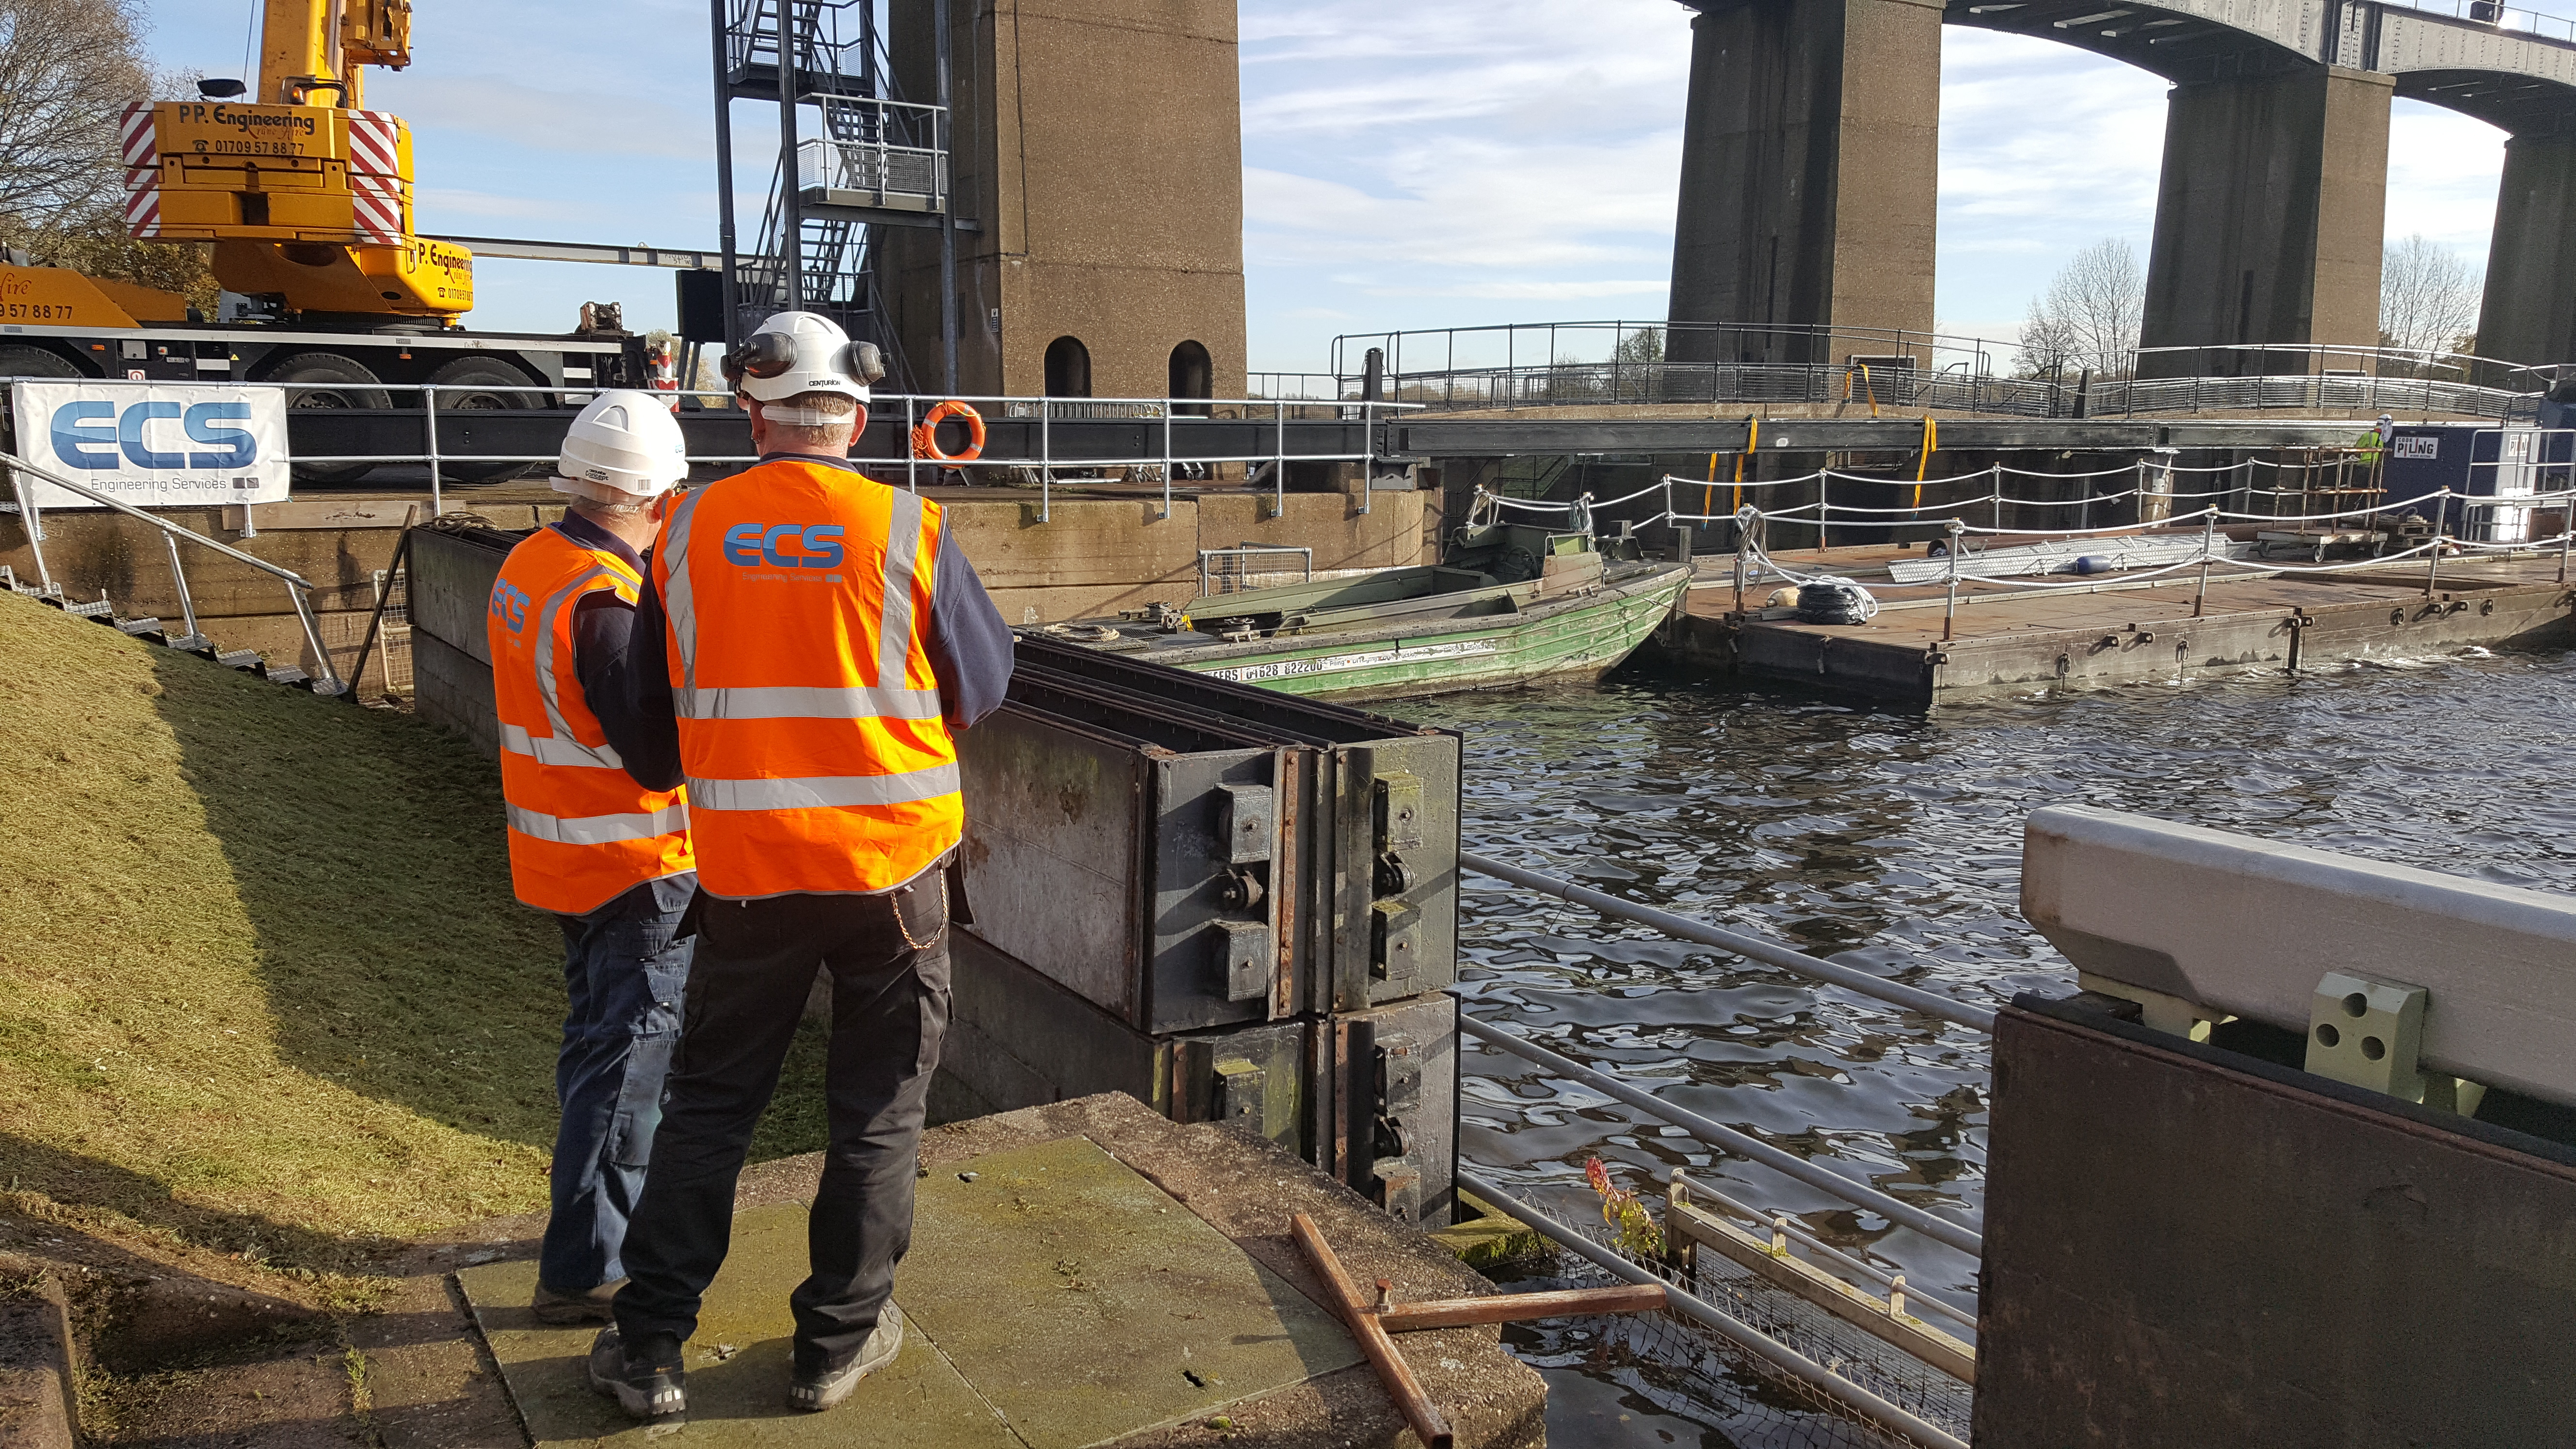 ECS Engineering Services has undertaken a large project to enhance operations at Colwick Sluice, including the installation of a new stop log handling system as well as maintenance of the gates and stoplogs.